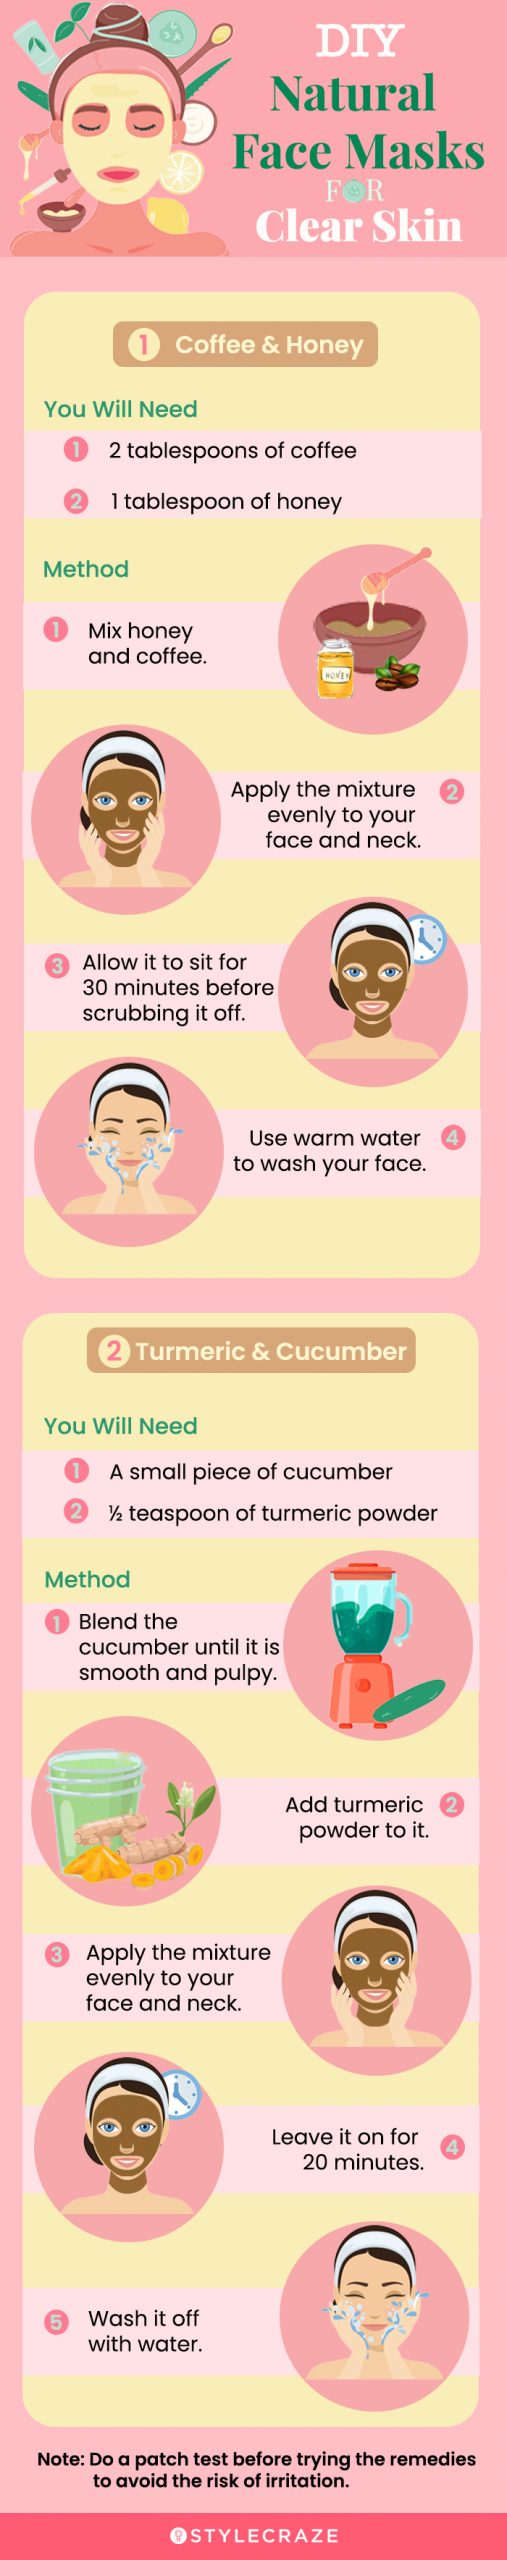 How To Clear Skin - 14 Natural Tips Skin